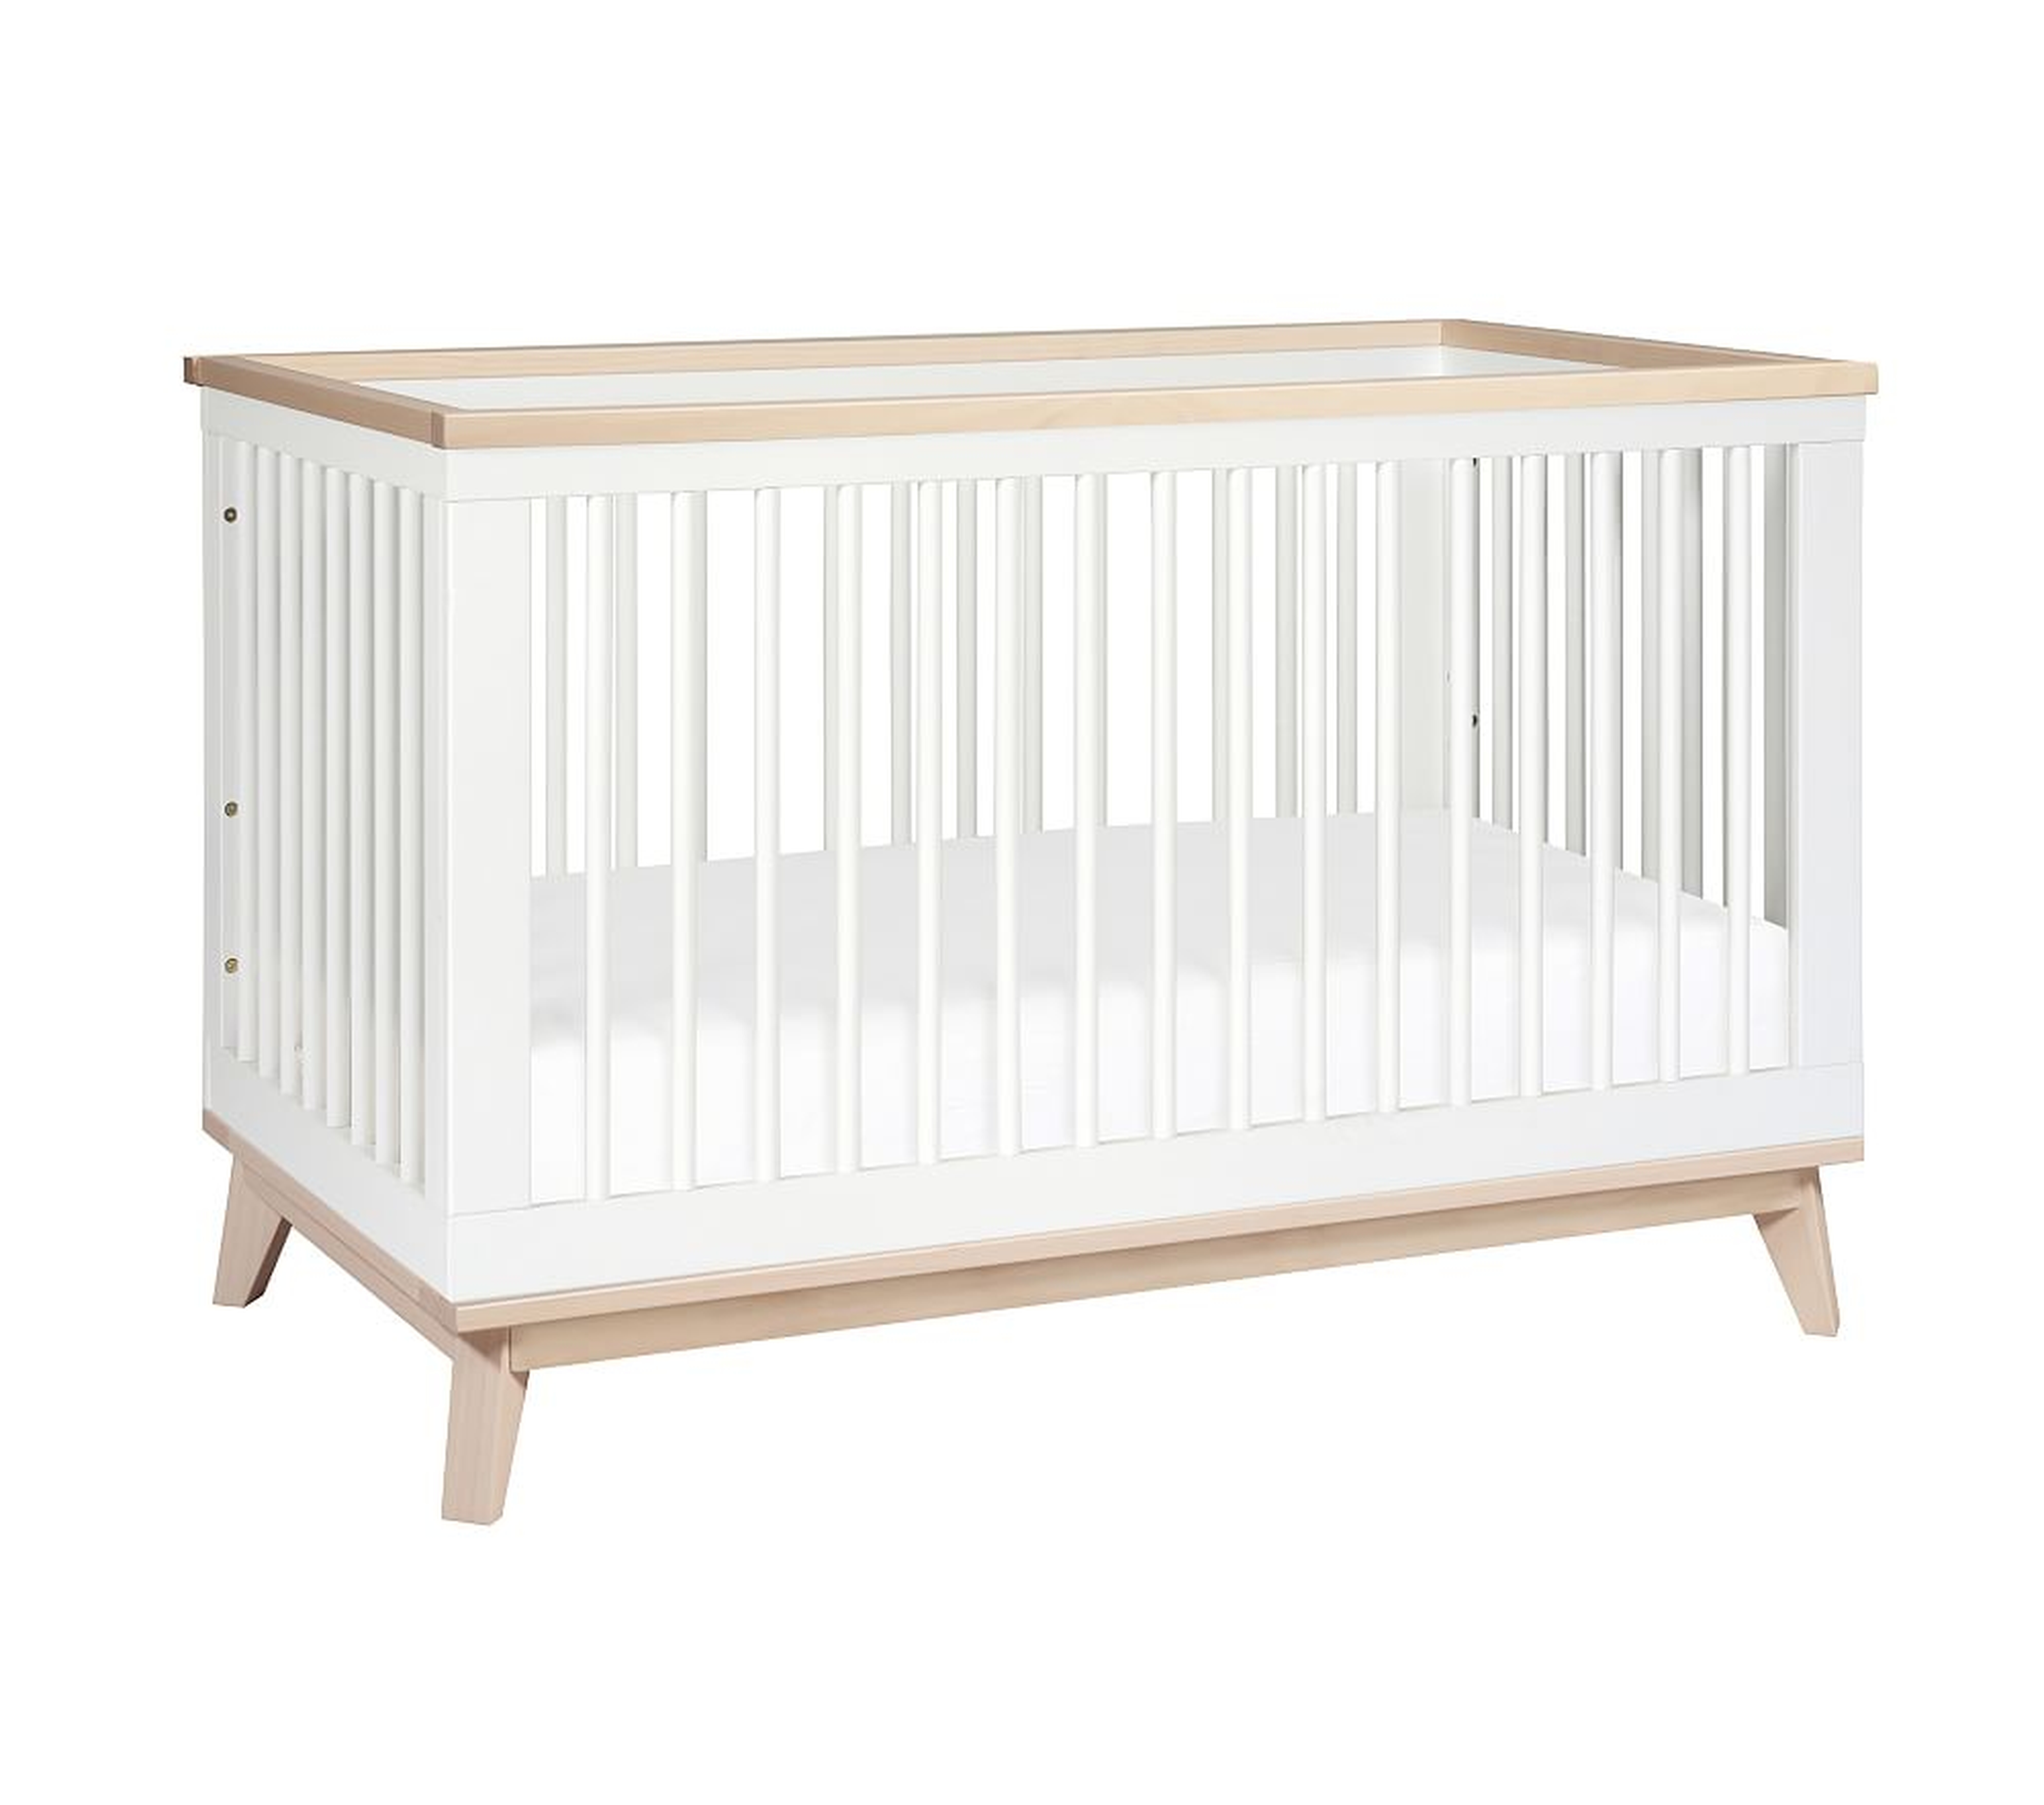 Babyletto Scoot 3 in 1 Convertible Crib & Conversion Kit, White/Natural - Pottery Barn Kids